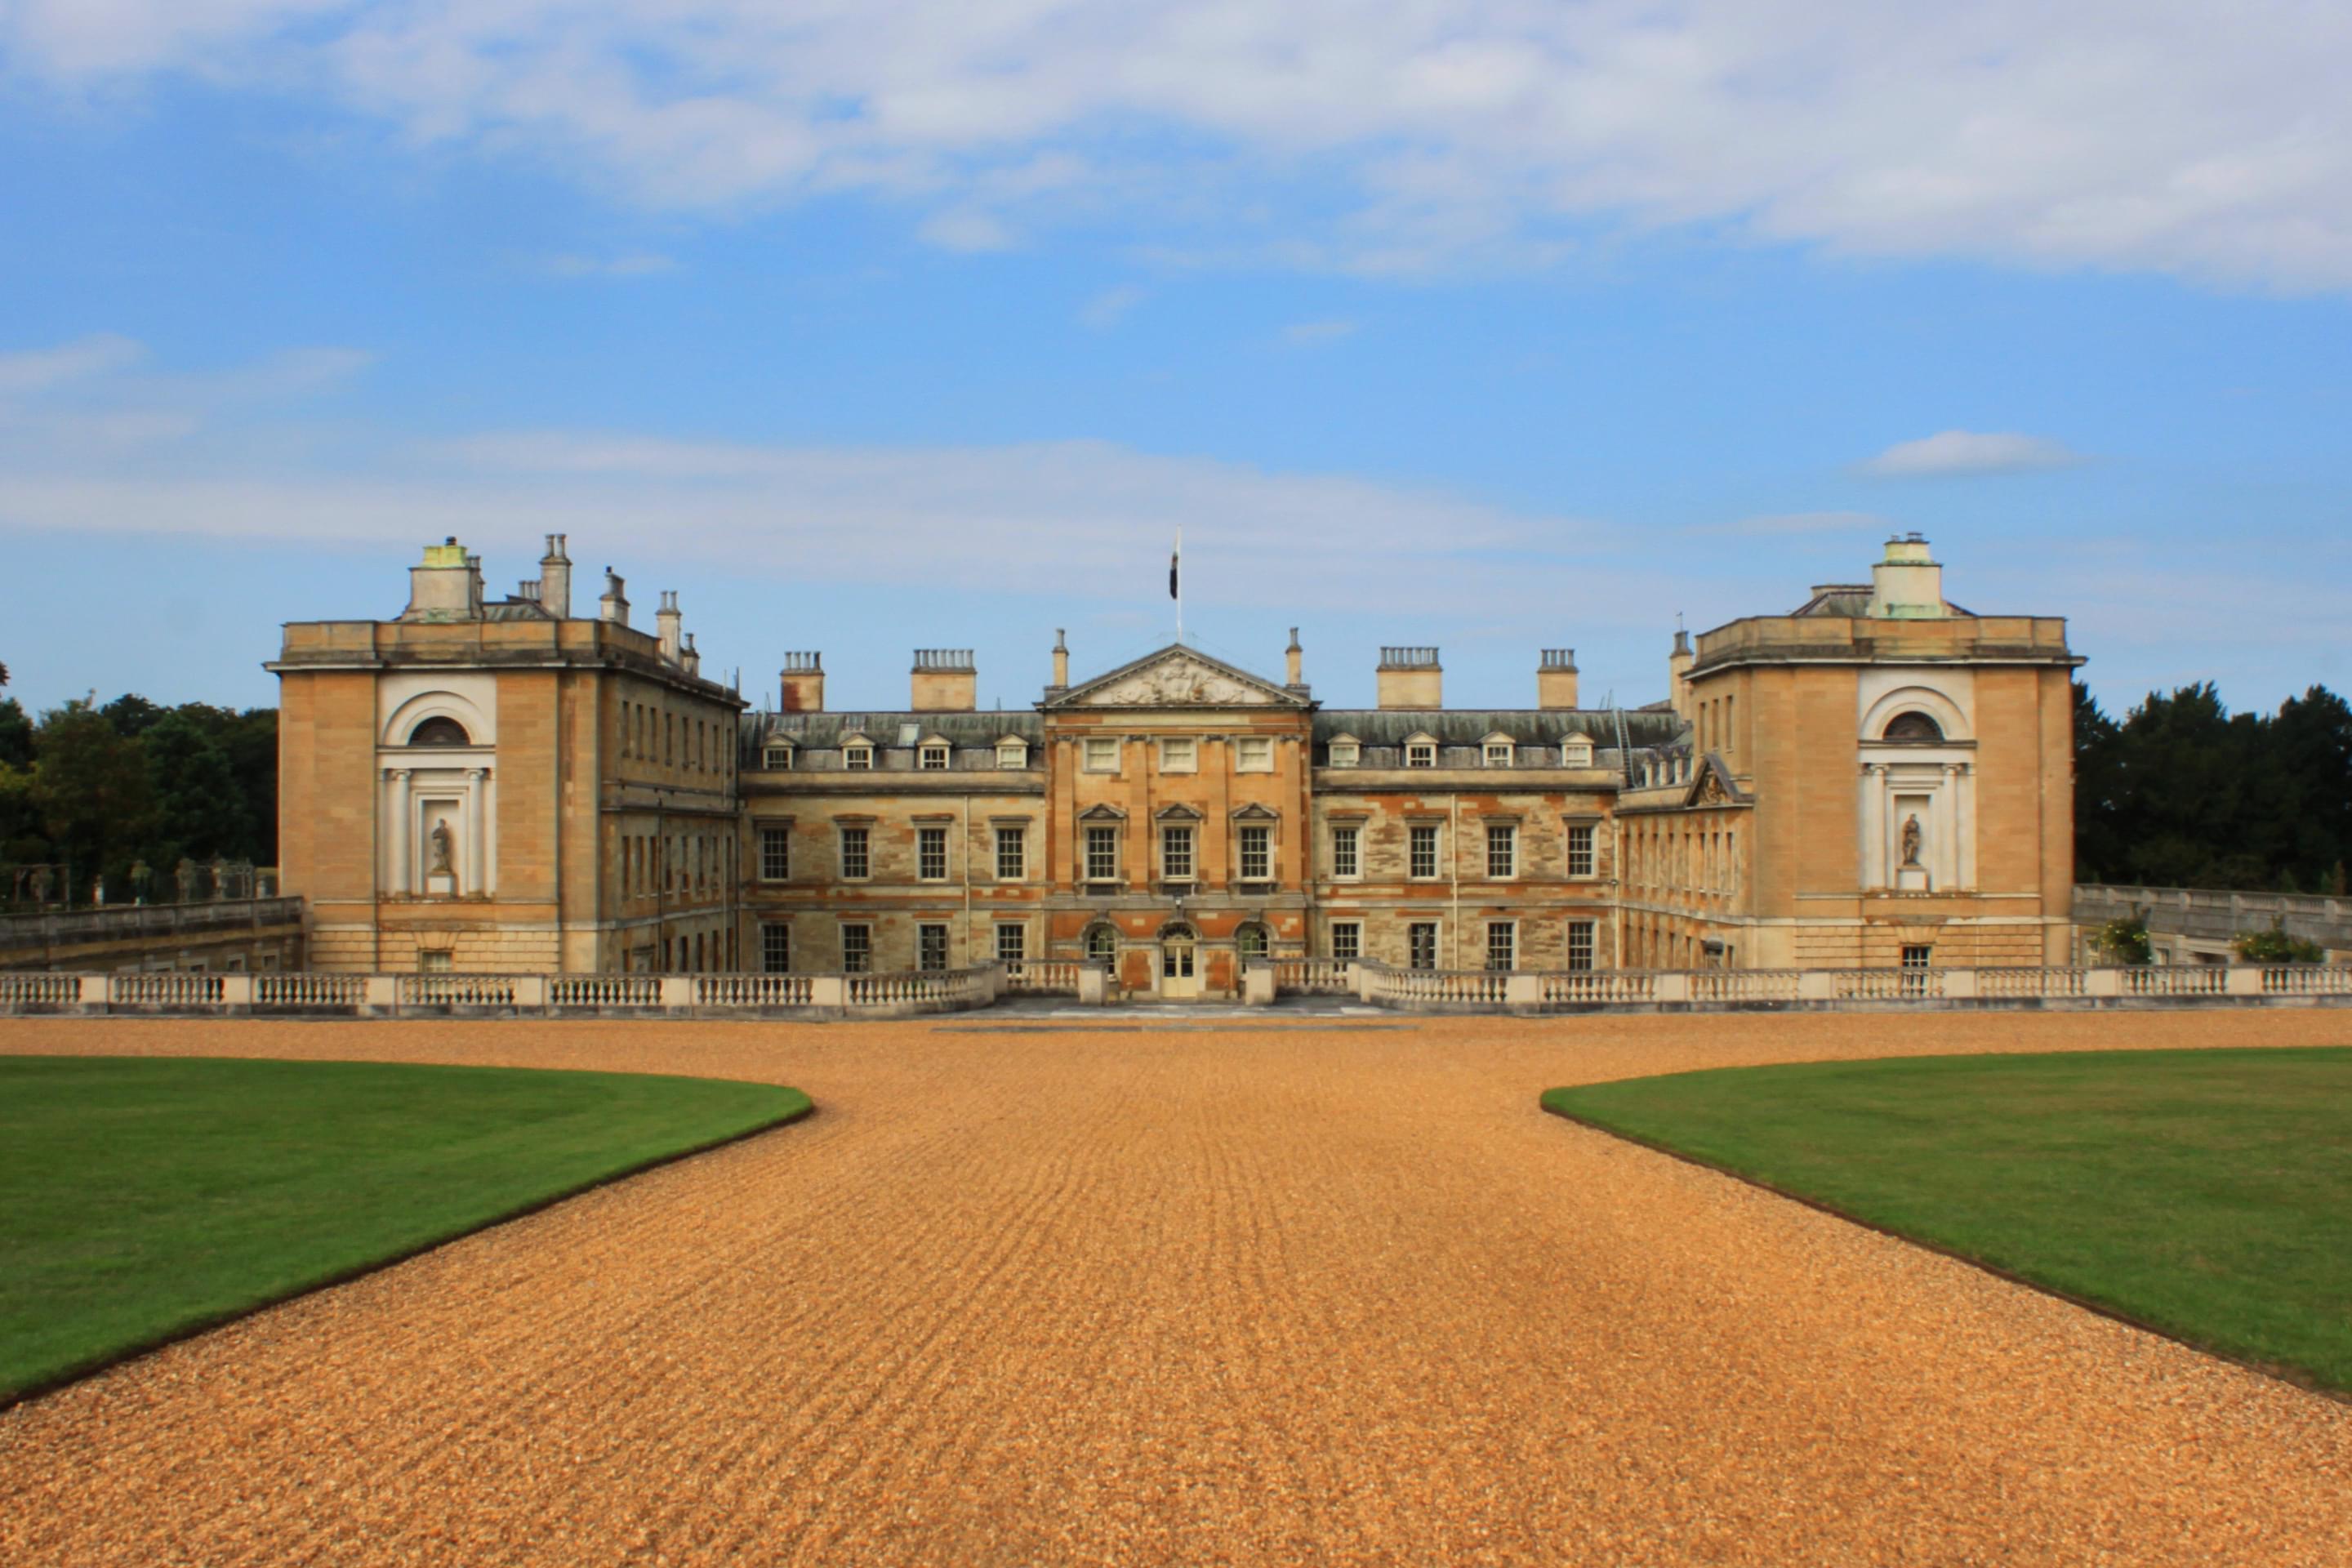 Woburn Abbey and Gardens Overview